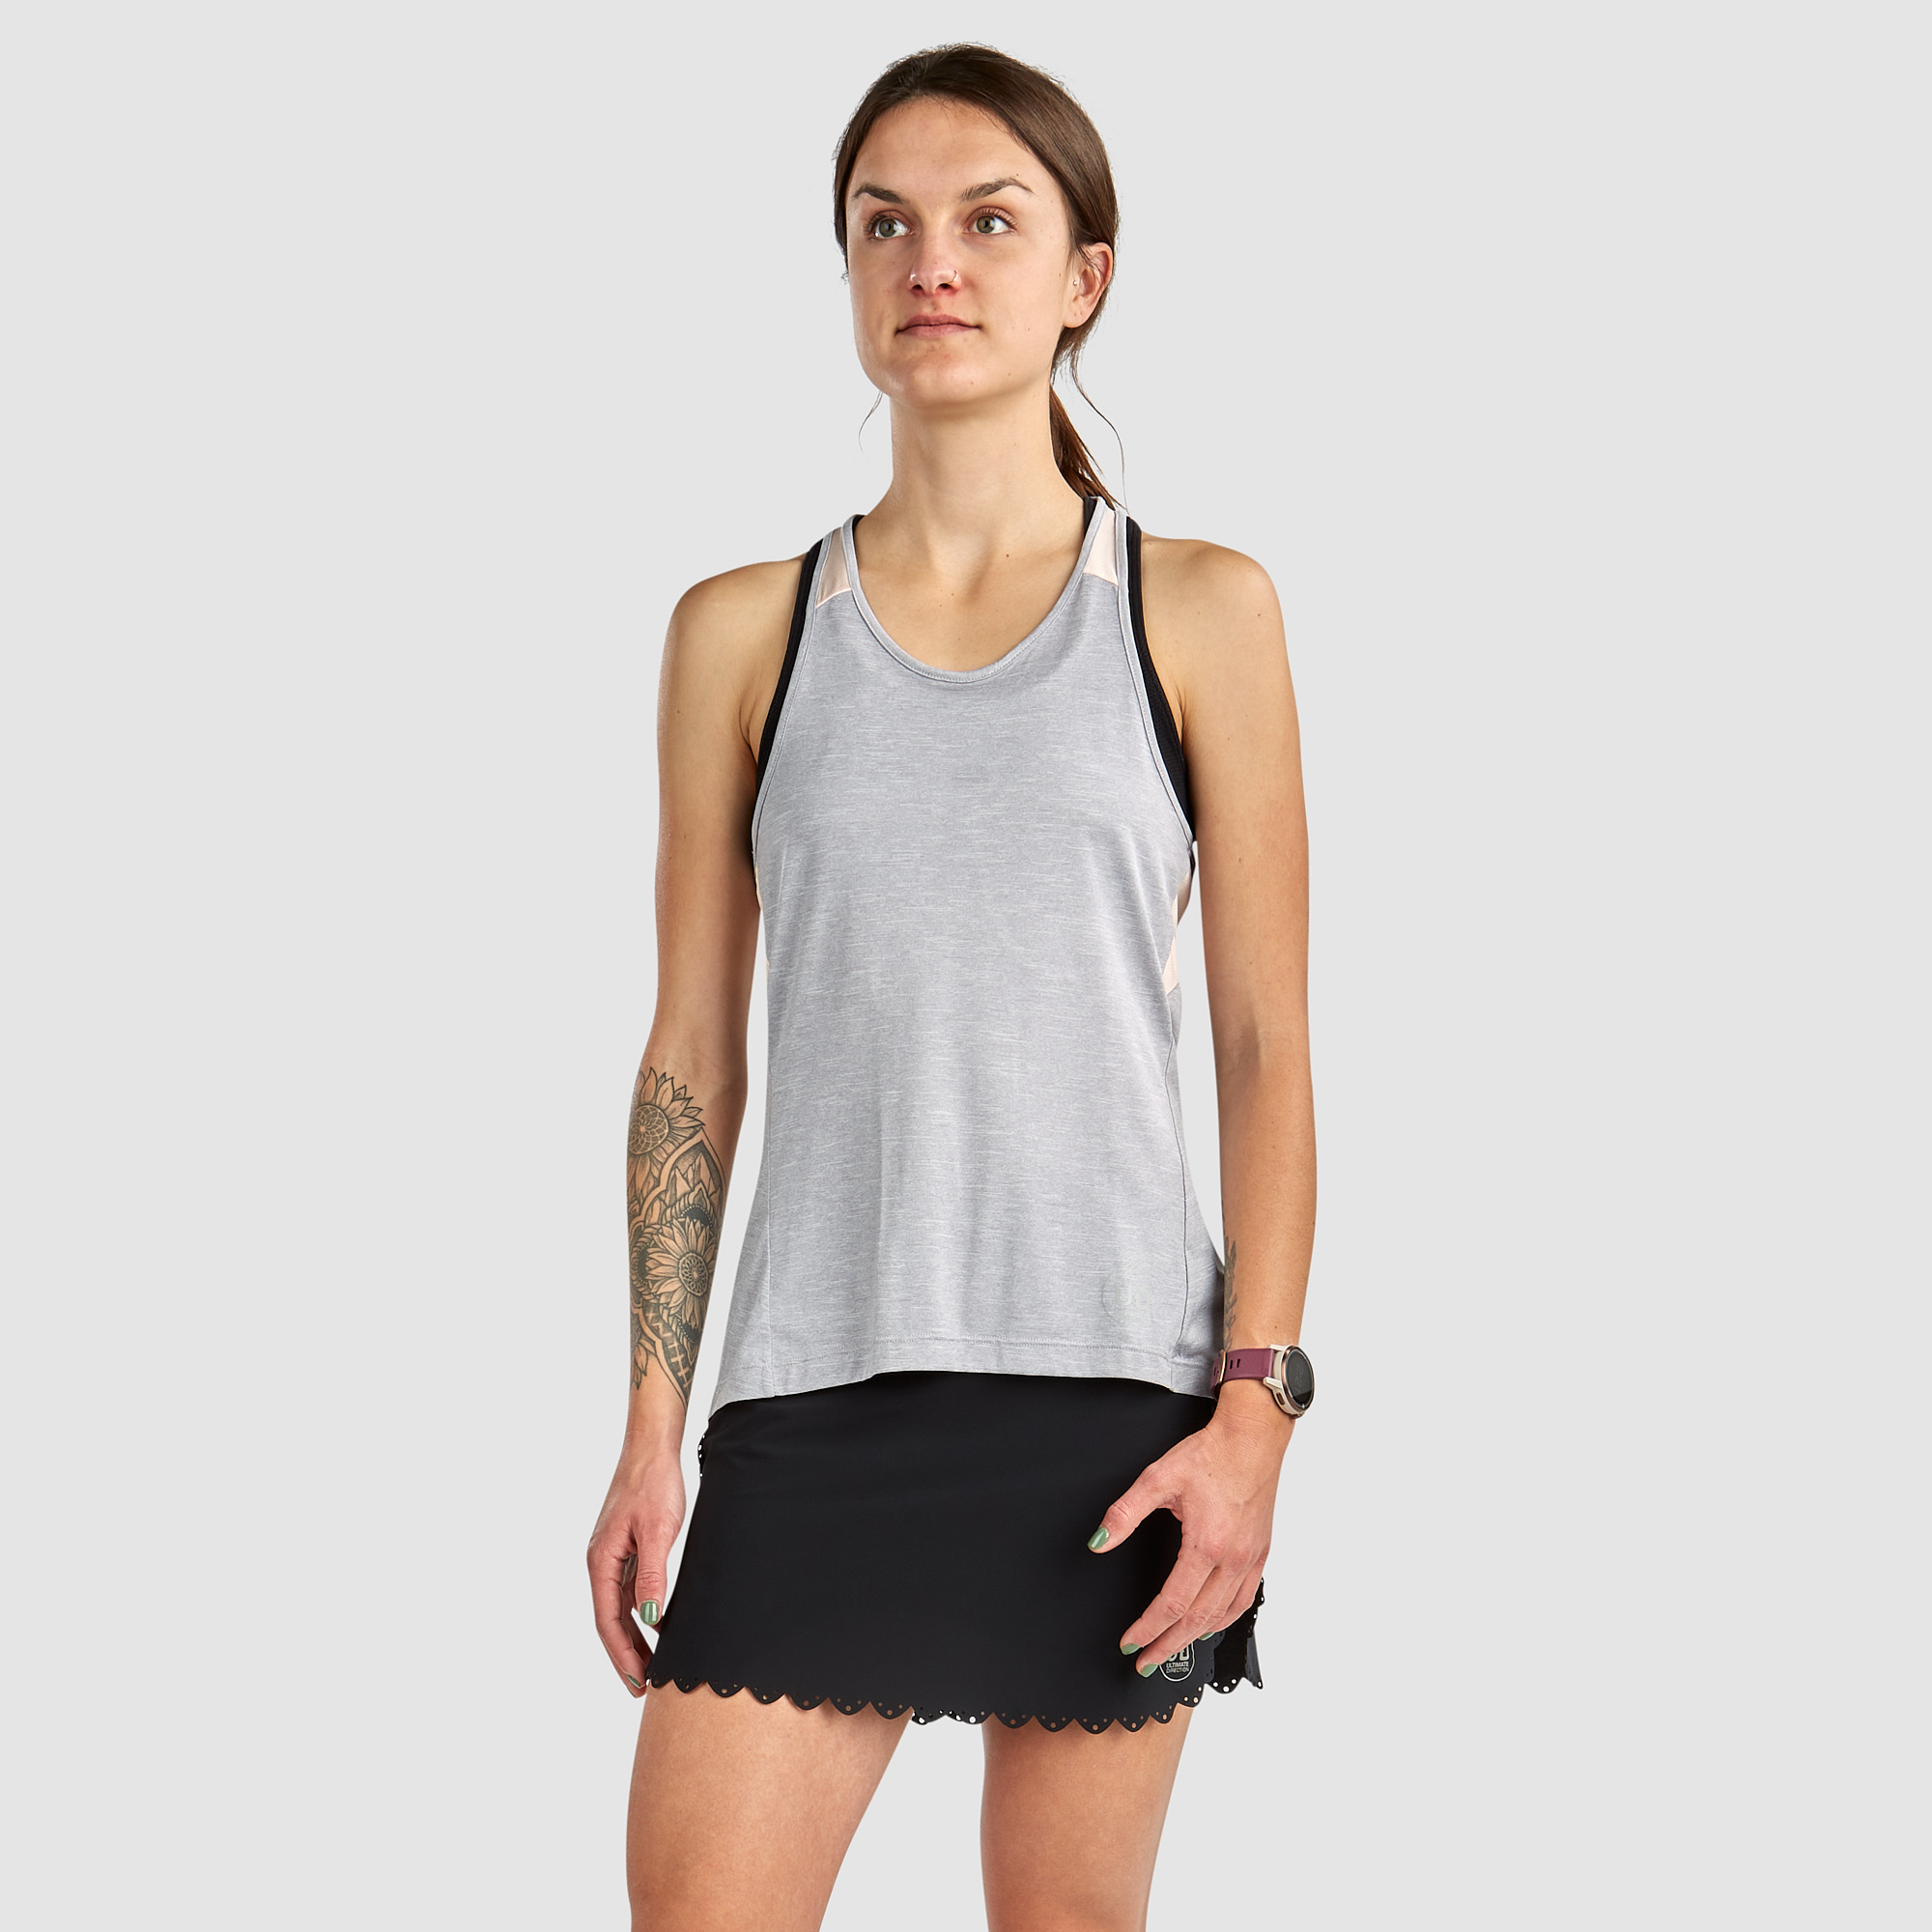 Ultimate Direction Women's Cirrus Singlet - Prior Year in Heather Gray Size Medium